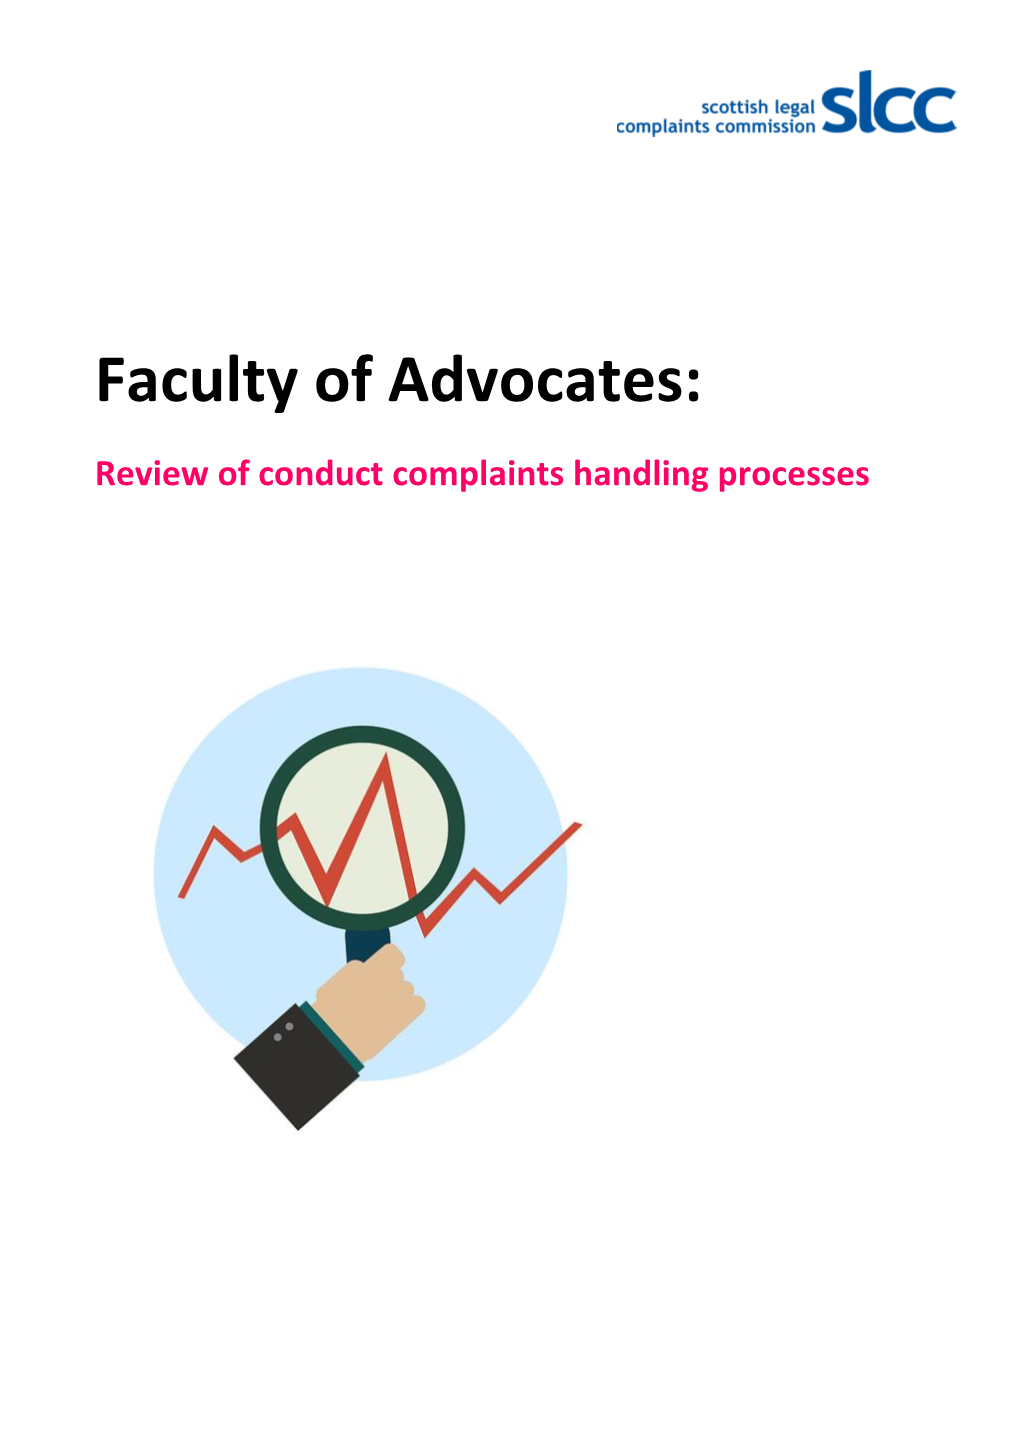 Faculty of Advocates Benchmarking Report Update 2019